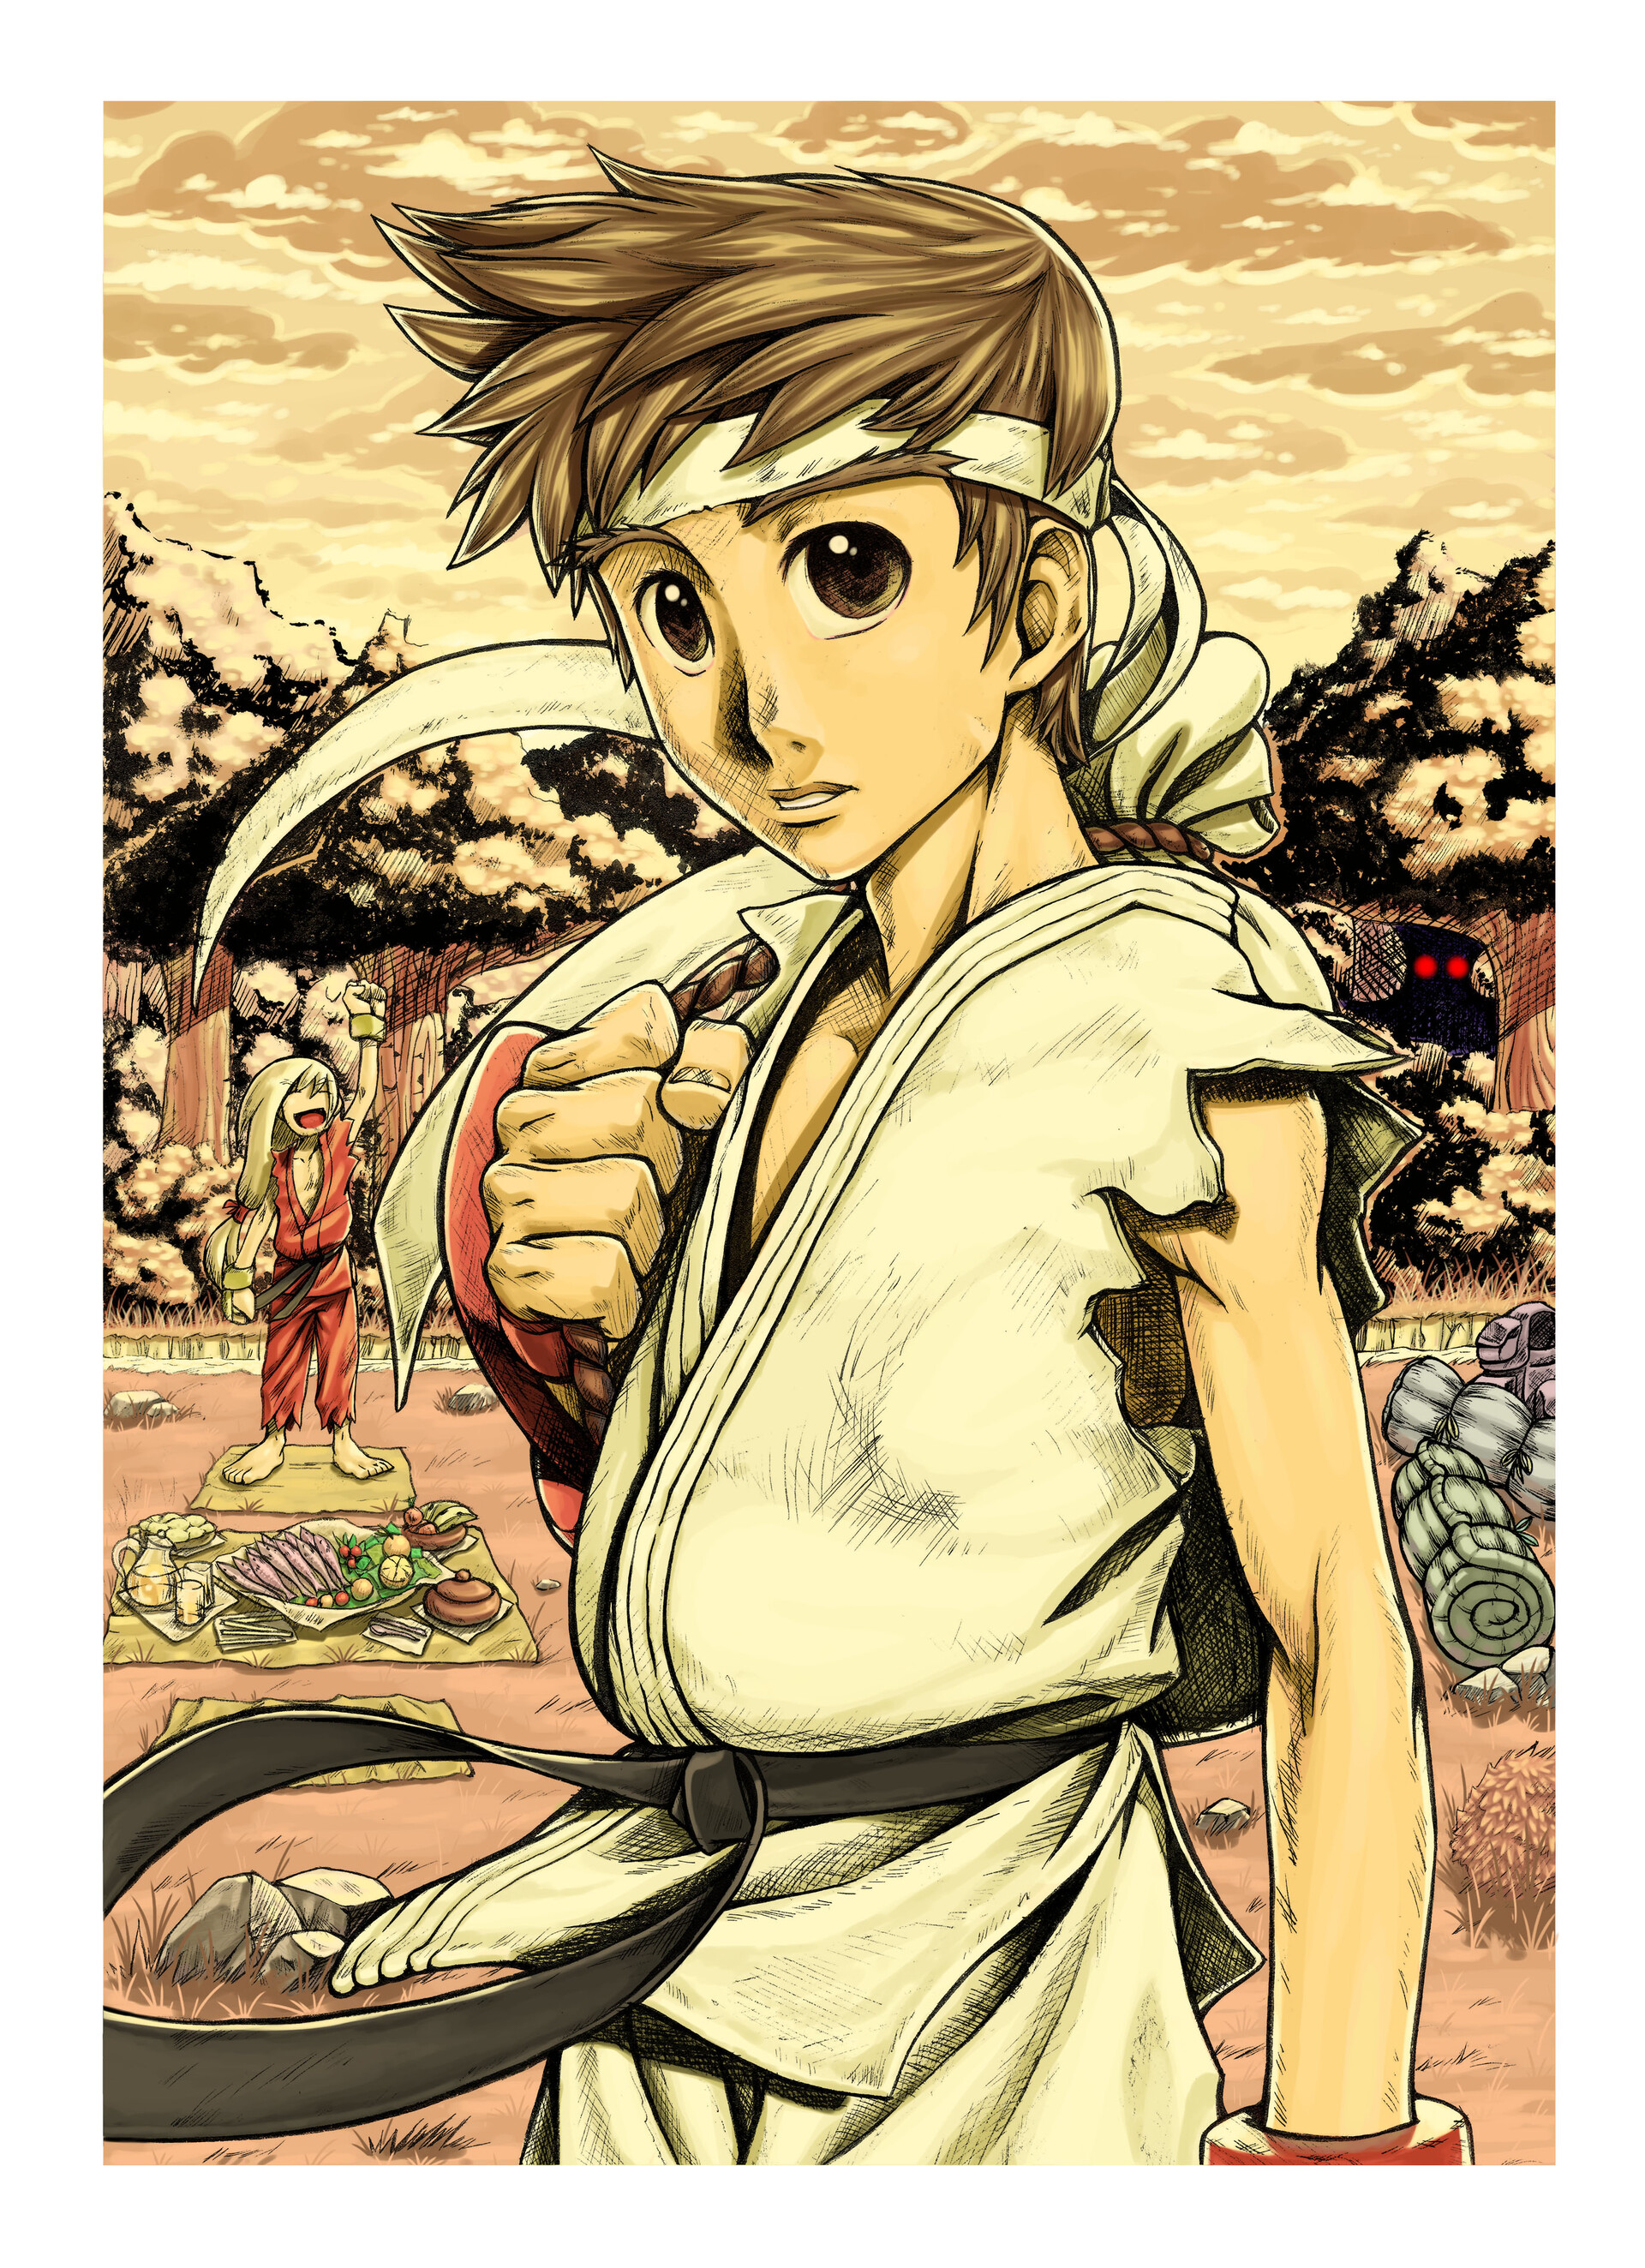 Ryu - anime  Street fighter art, Ryu street fighter, Street fighter  characters